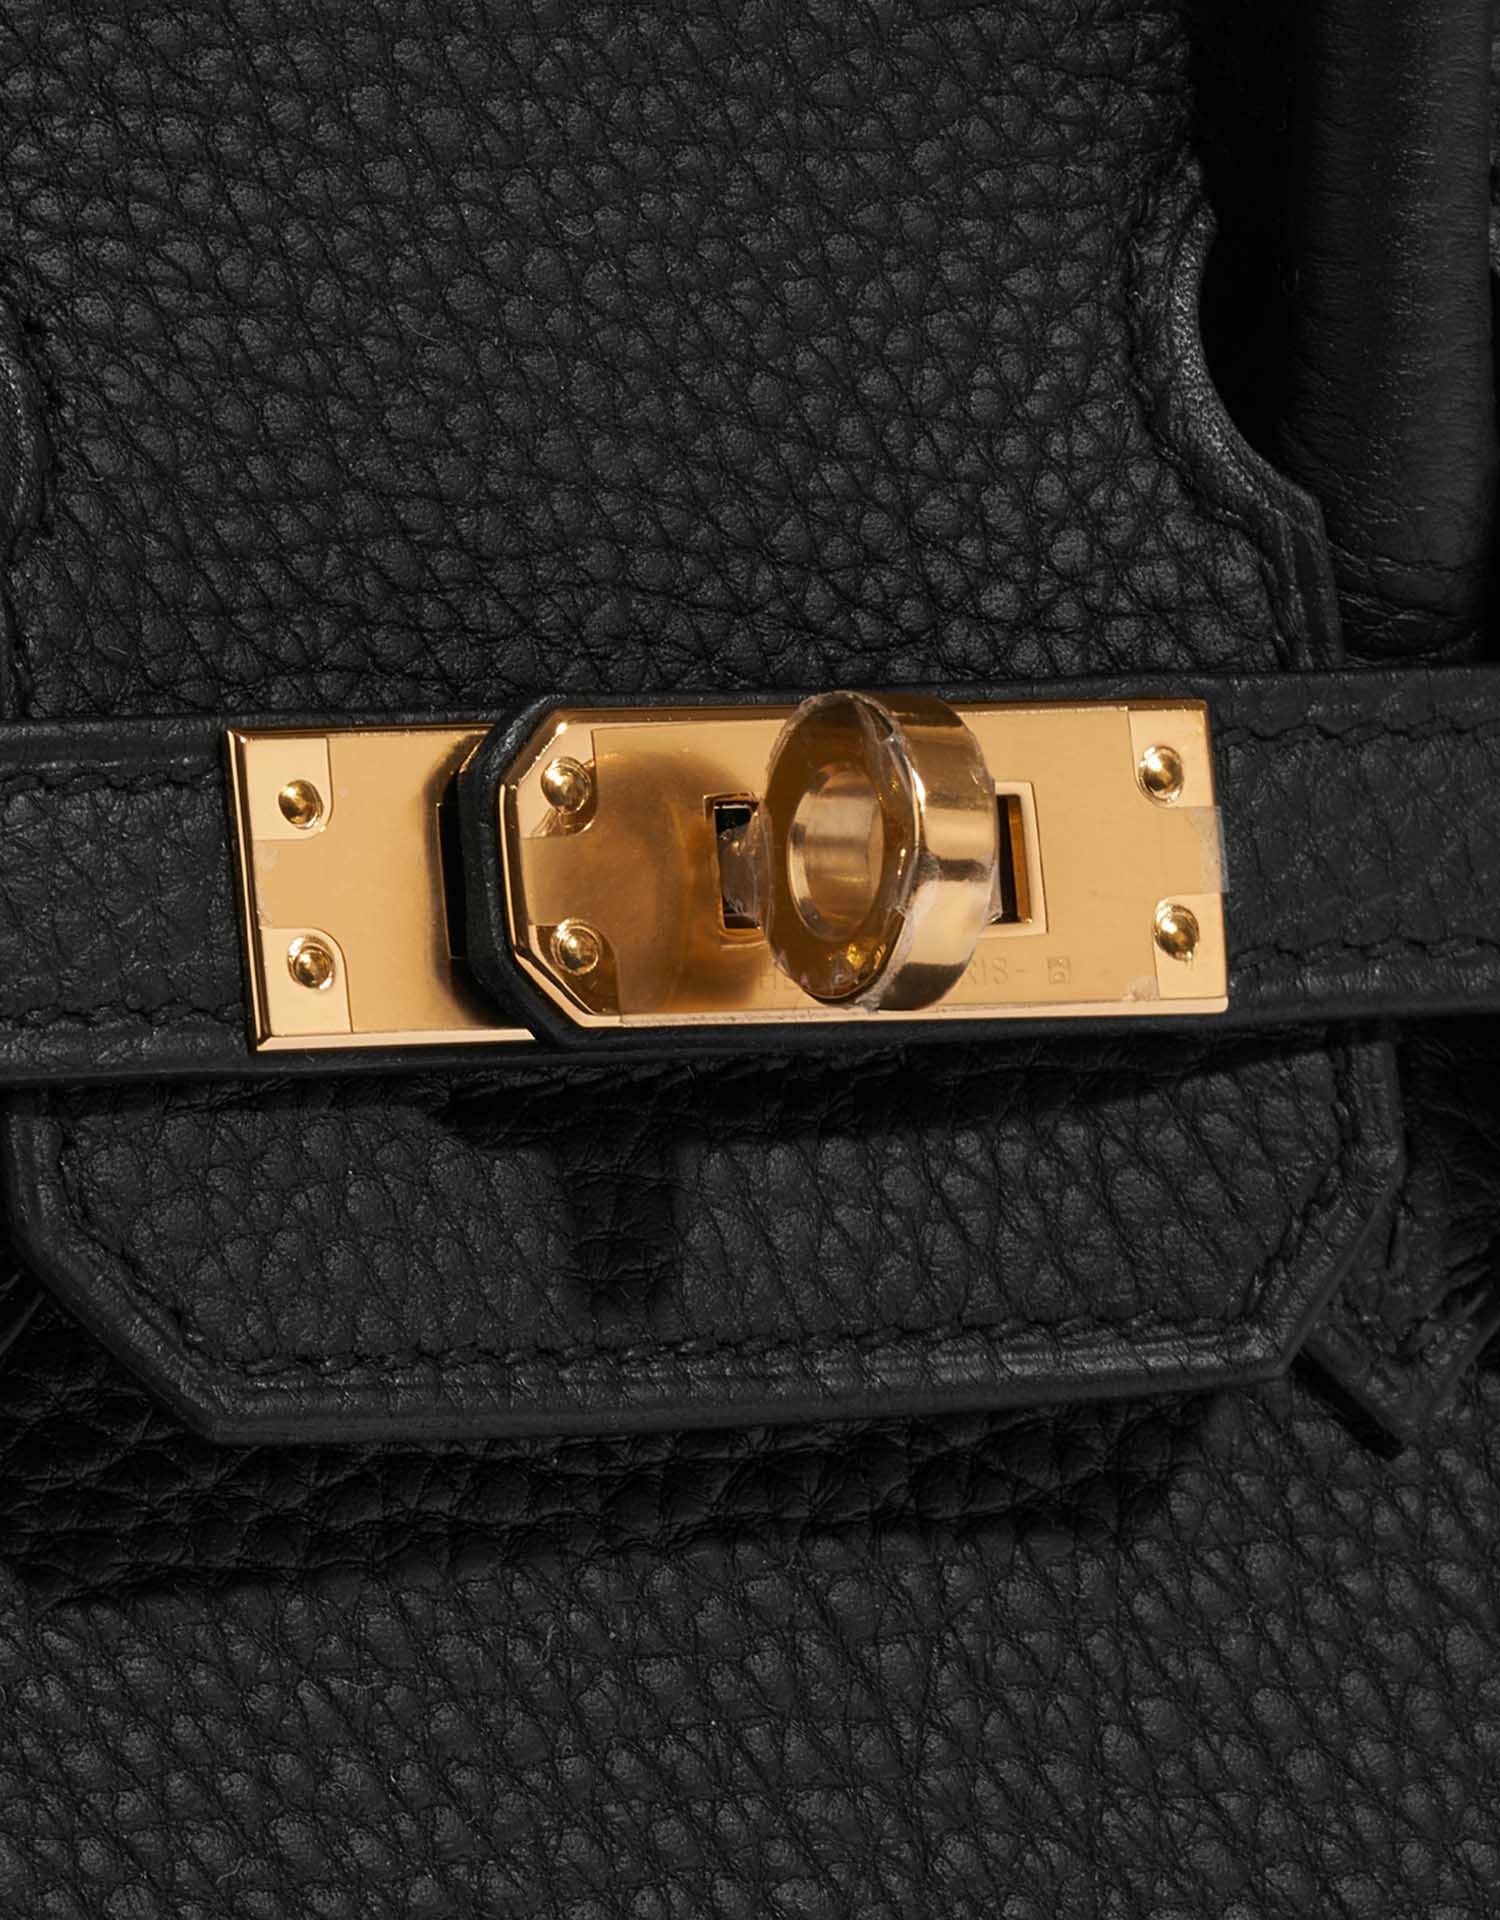 Hermes Birkin 25 Black Togo GHW – Consign of the Times ™